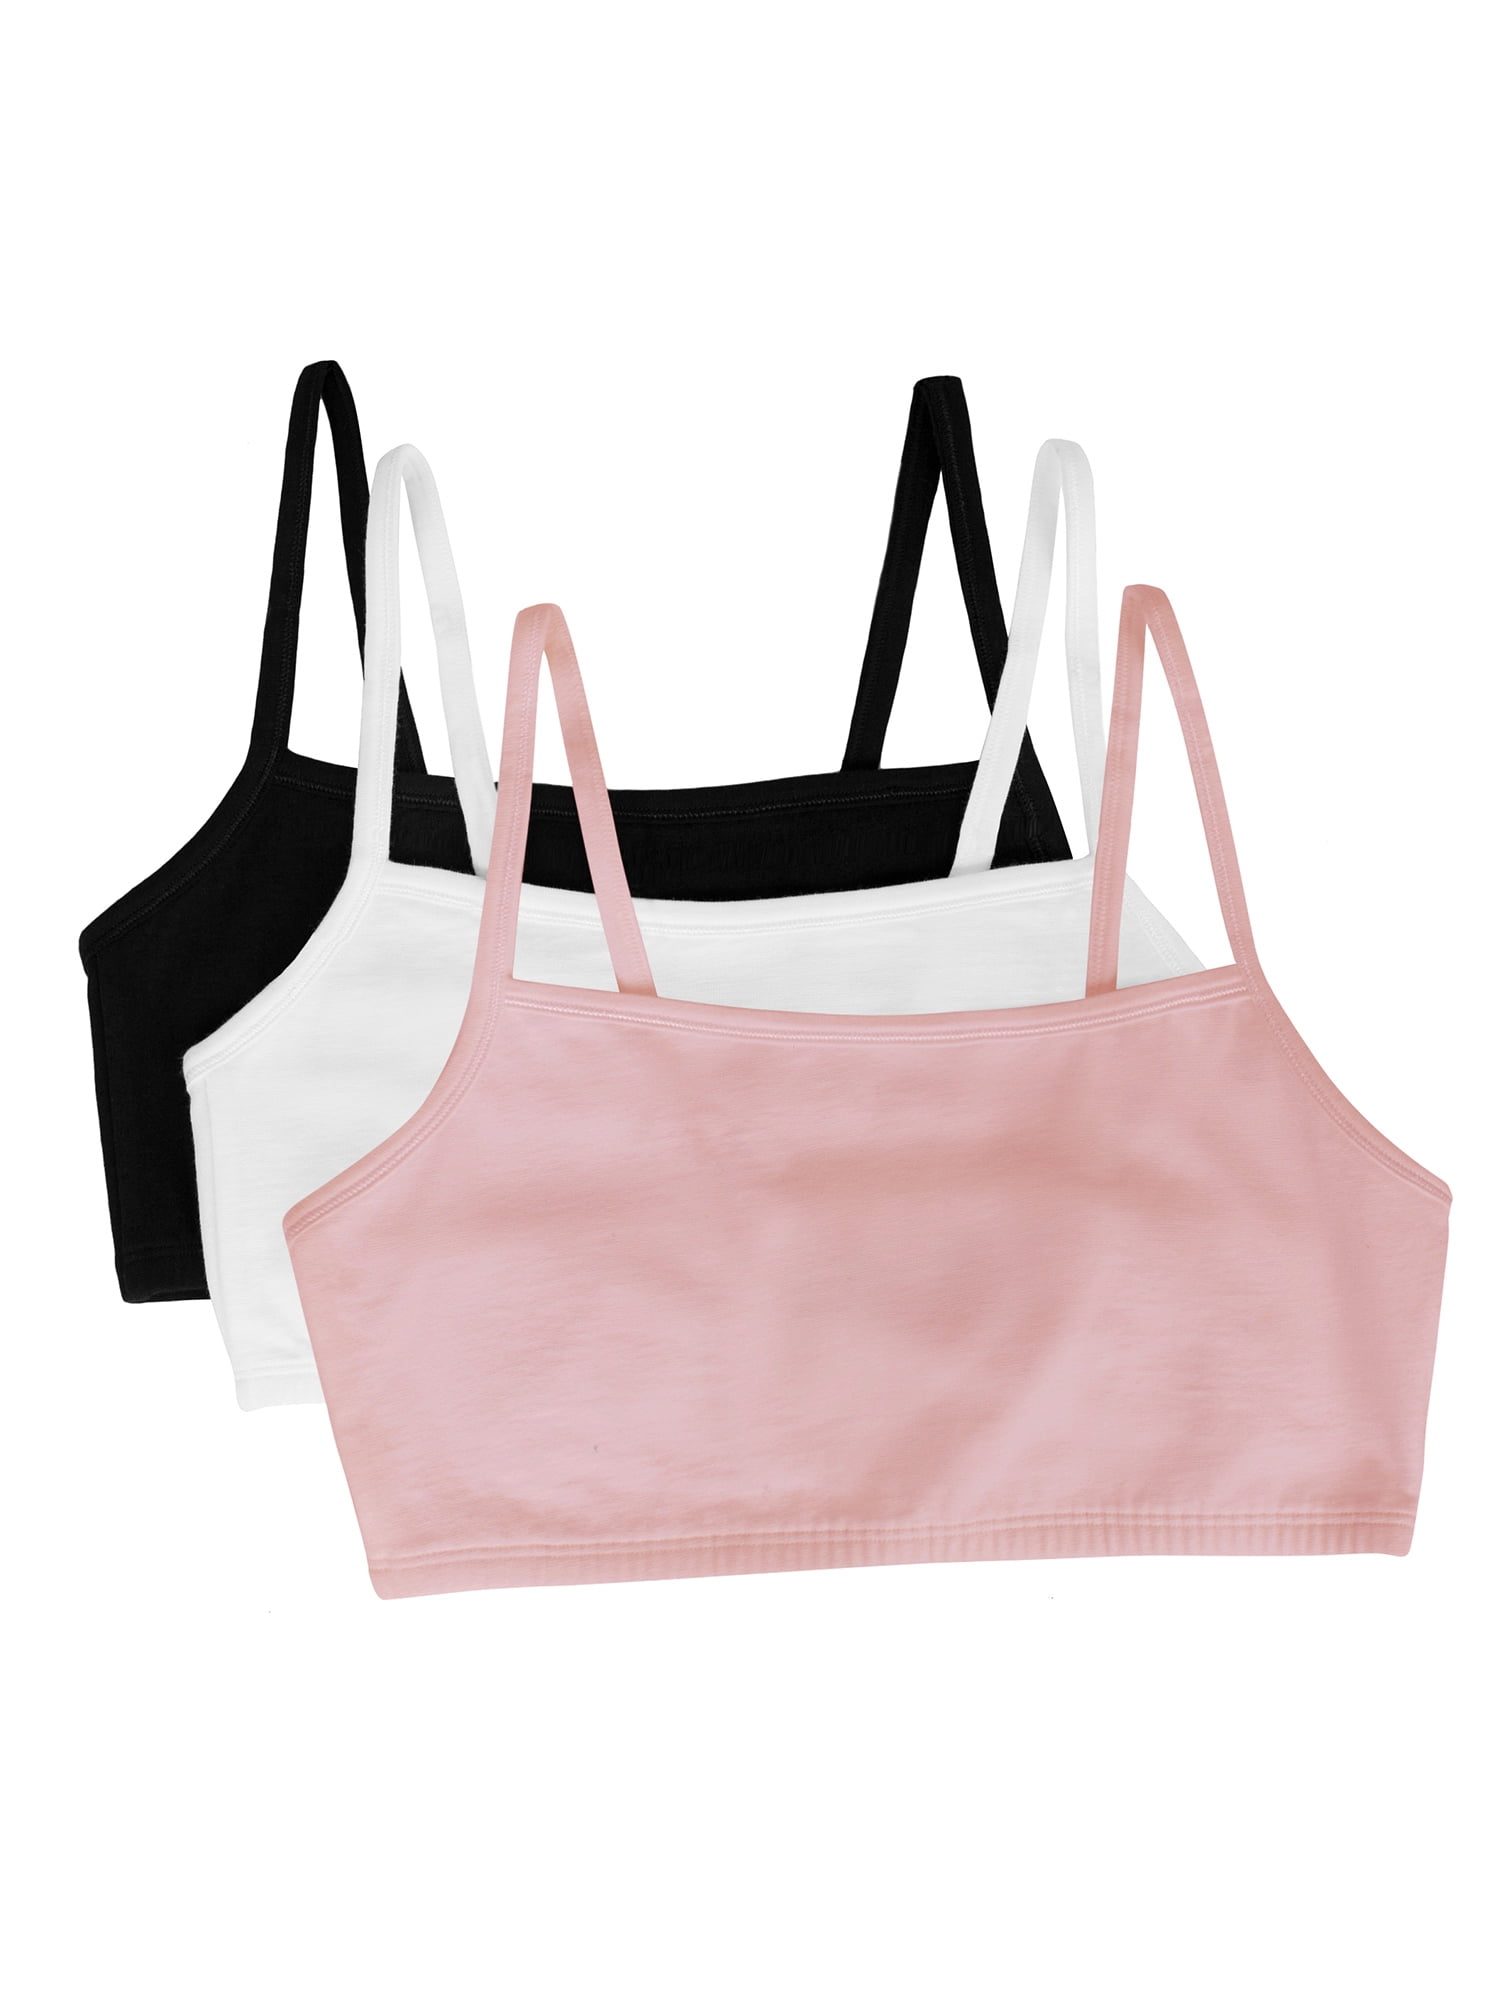 Fruit Of The Loom Girls' Built Up Sports Bra 3-pack Ditsy Blooms